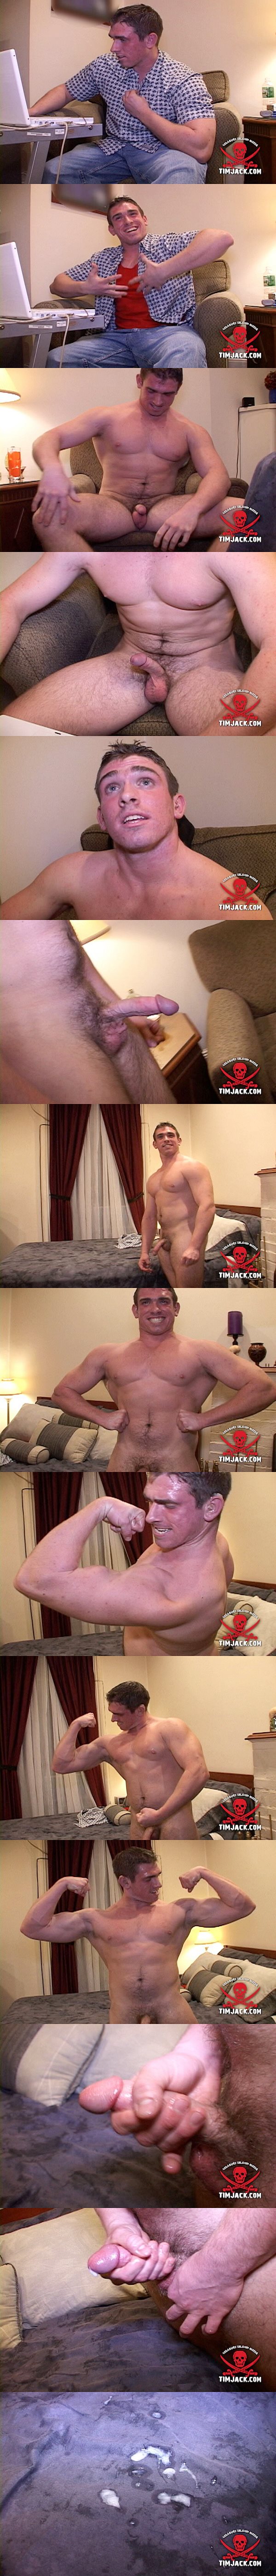 Muscular straight dude Aaron strips naked, flexes his muscle body and shoots his load for the first time on camera at Tim Jack